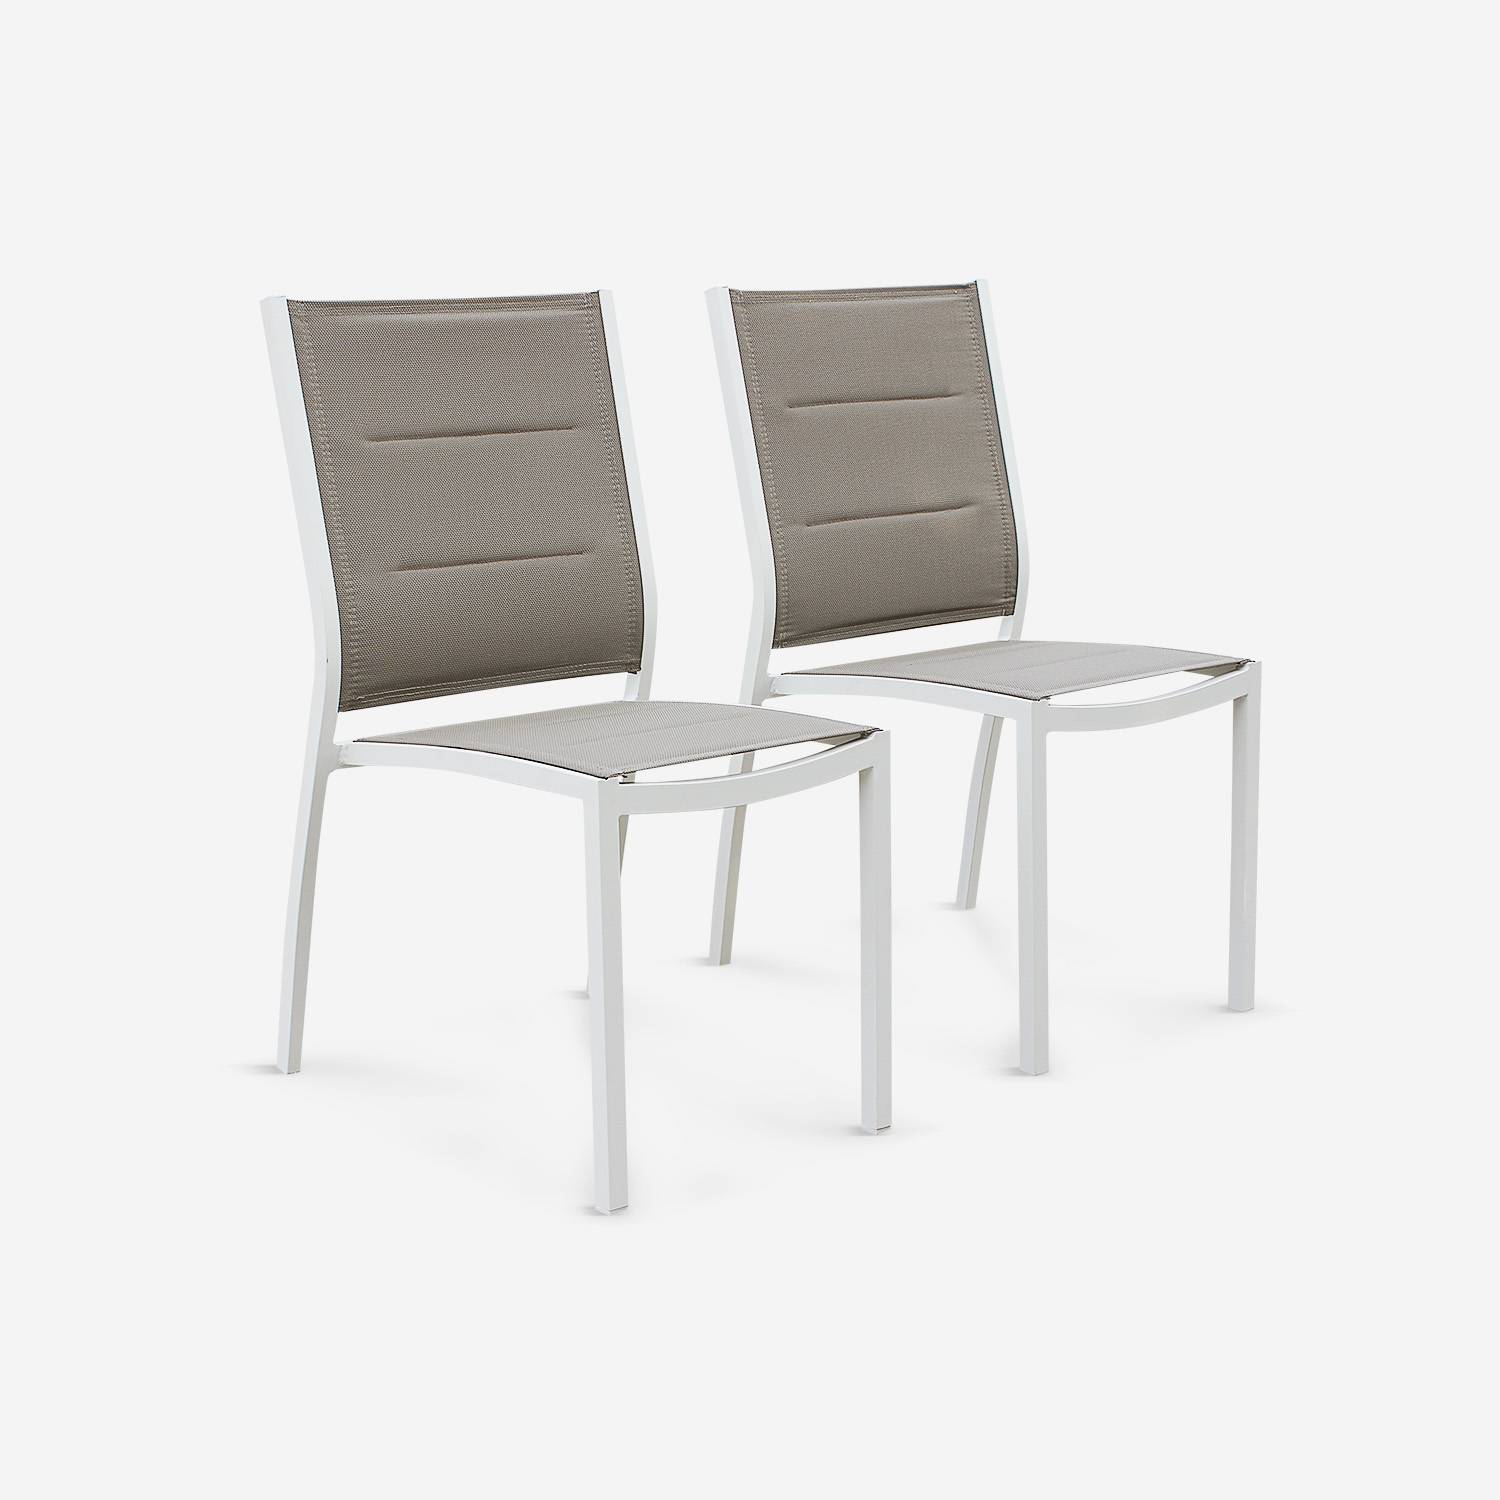 Set of 2 stackable chairs - Chicago - White aluminium and Beige-Brown textilene Photo3